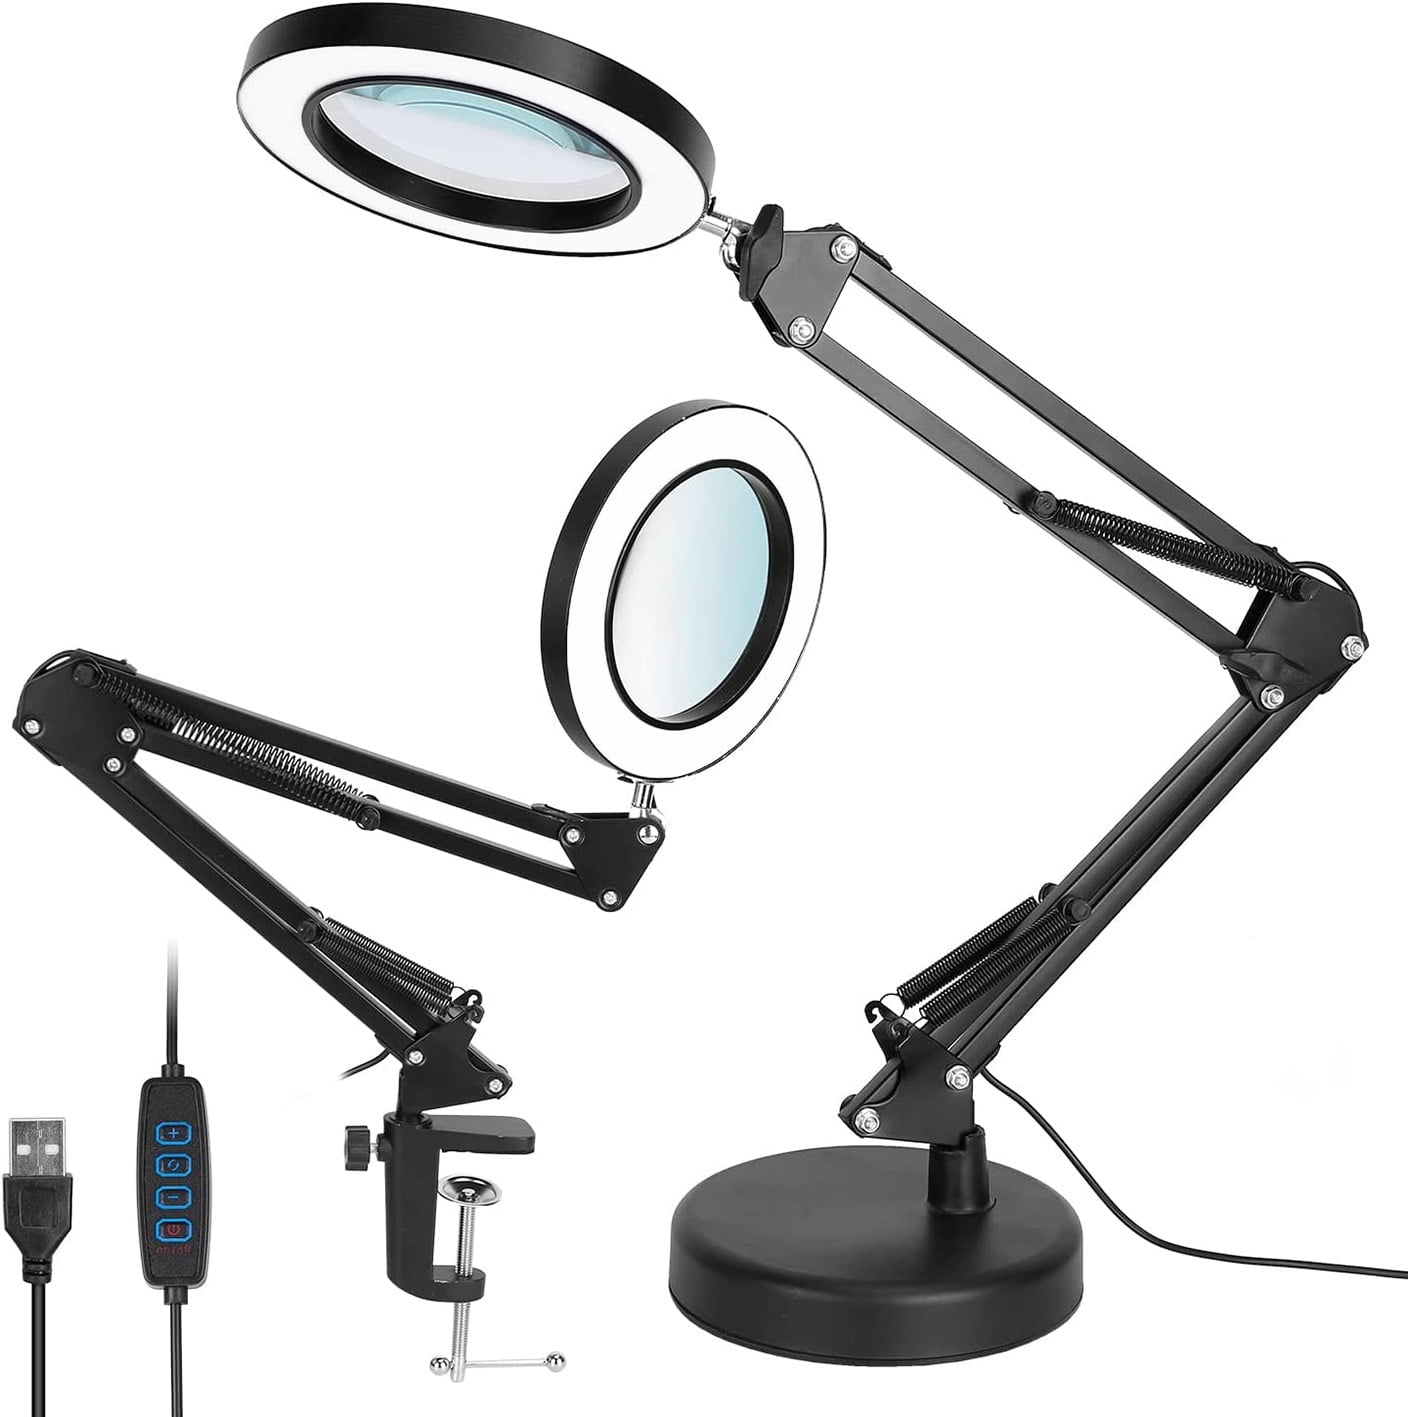 Pro Series Elemento LED (5x Diopter) Magnifying Lamp with Large Glass 5.5 Diameter and Touch Control Brightening Adjustment System